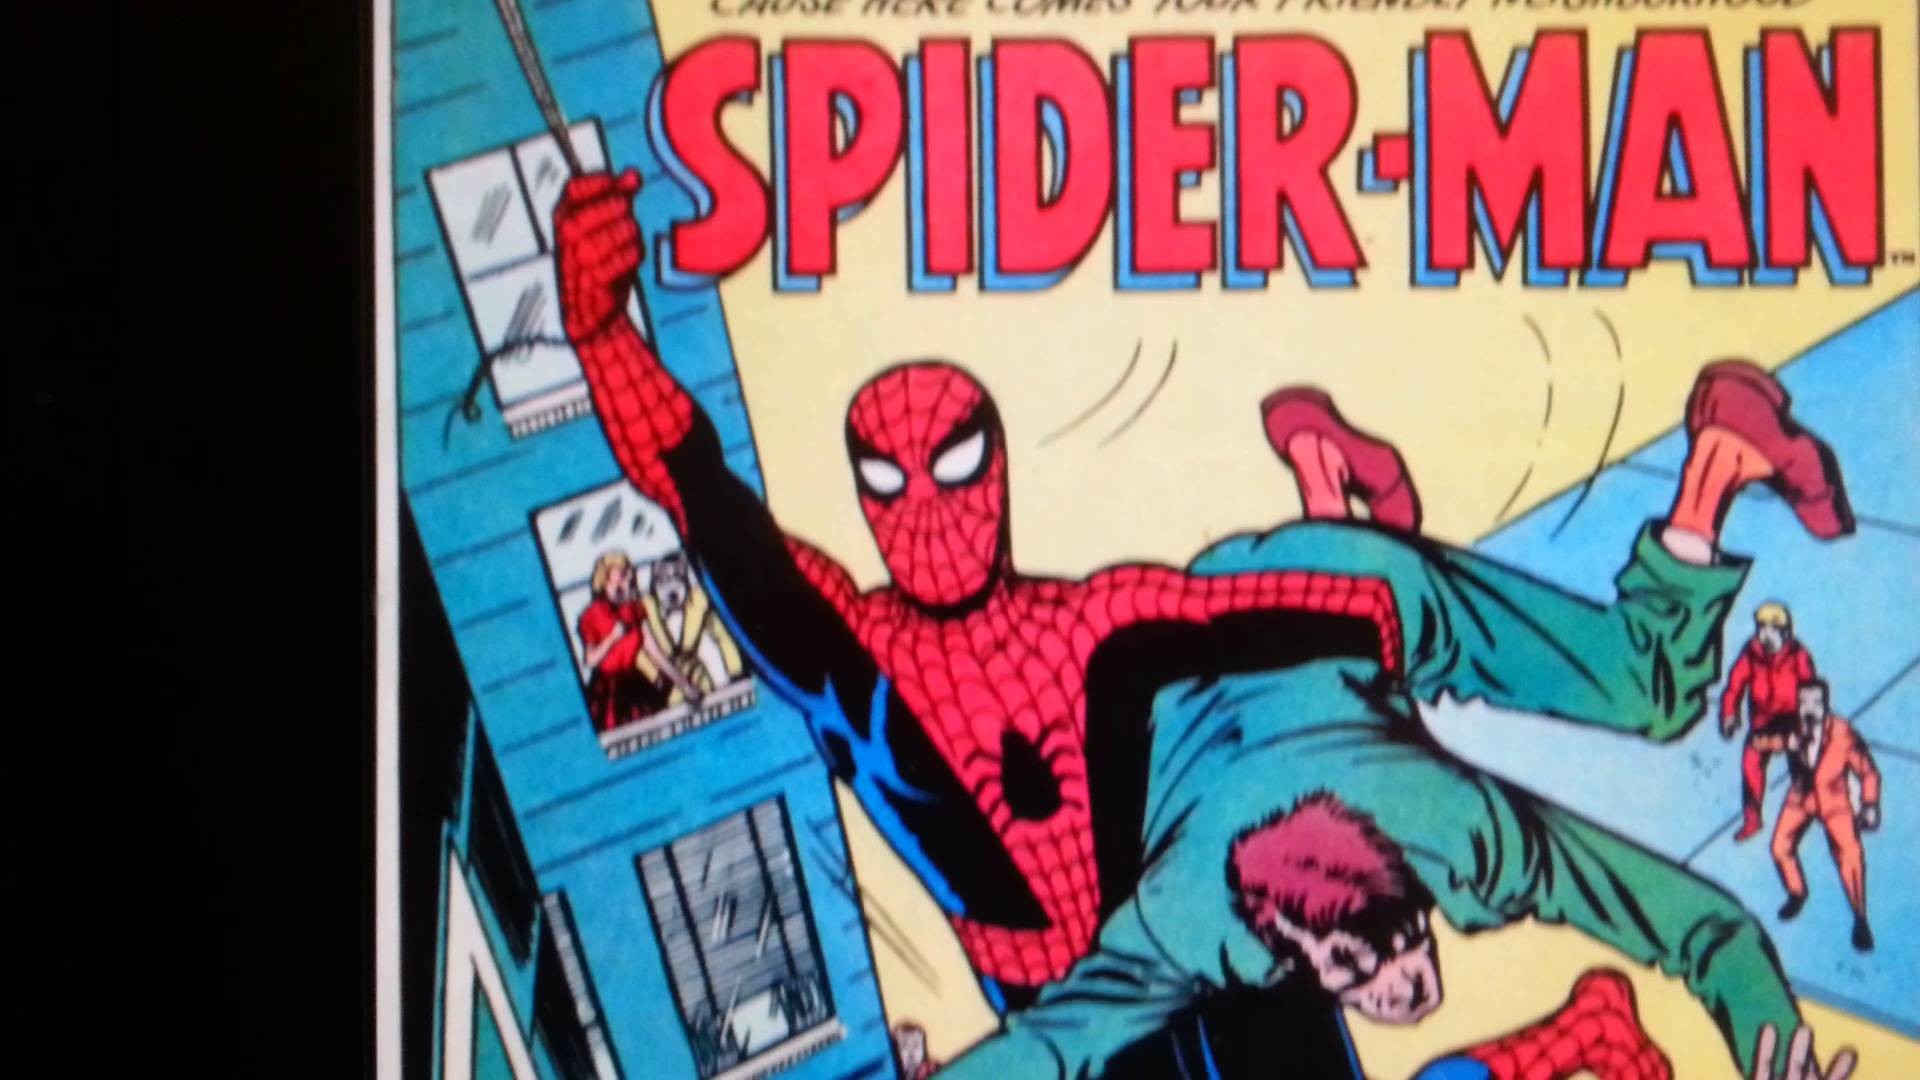 1920x1080 Did Stan Lee create Spider-Man with Steve Ditko & Jack Kirby in 1954?  Spiderman Homecoming